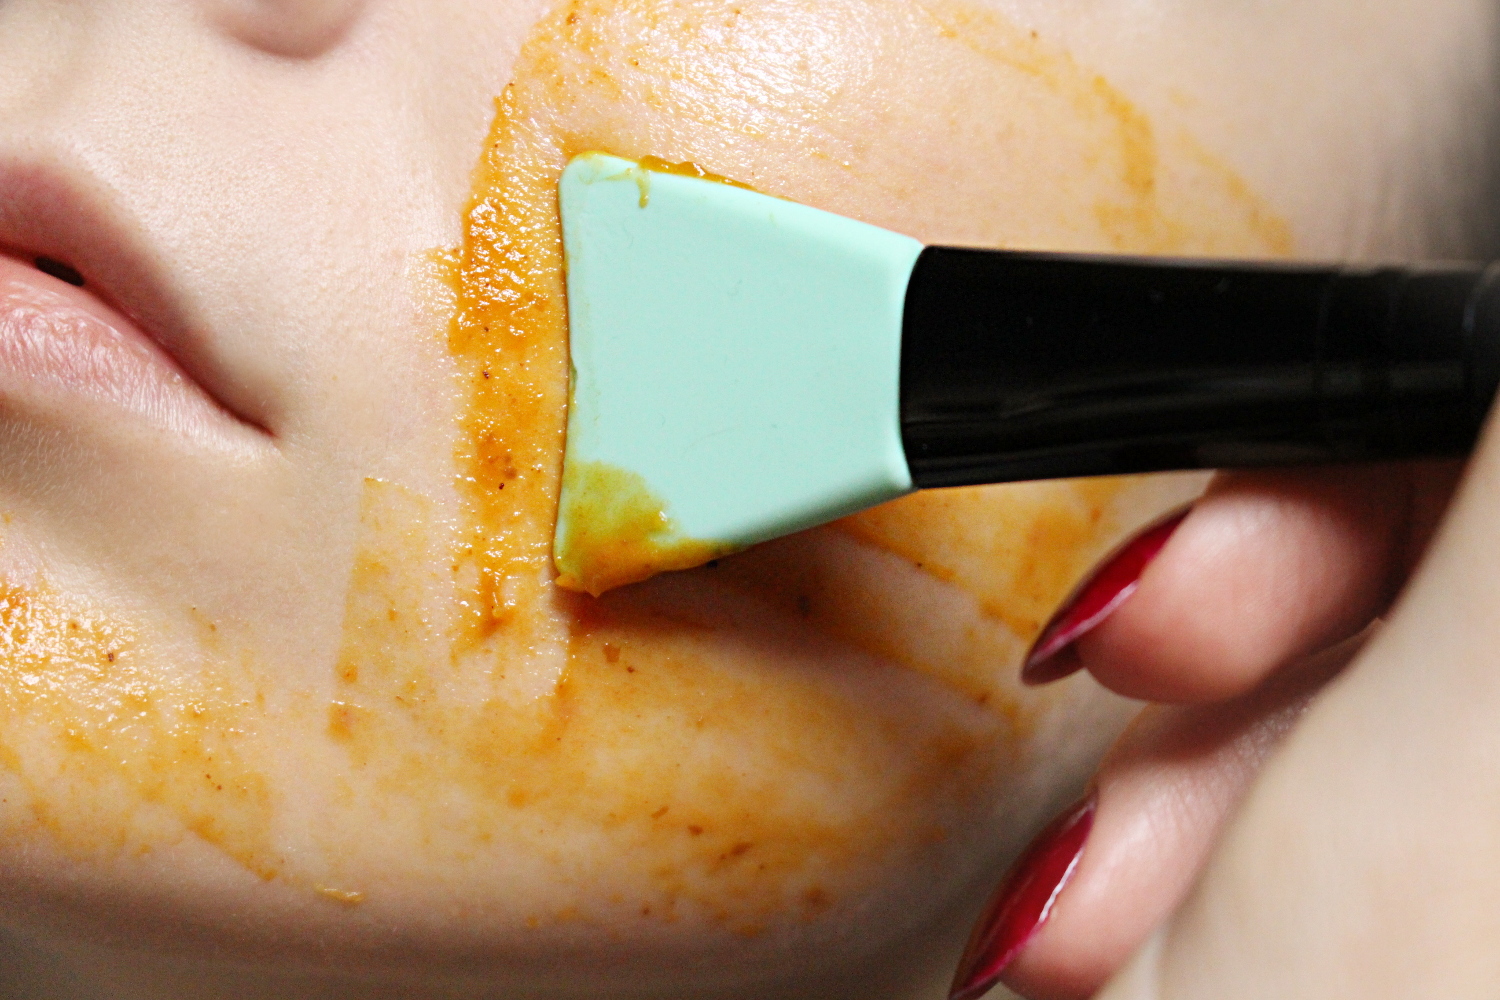 blogger Liz Breygel shows how to apply face mask on to a face with a silicone brush